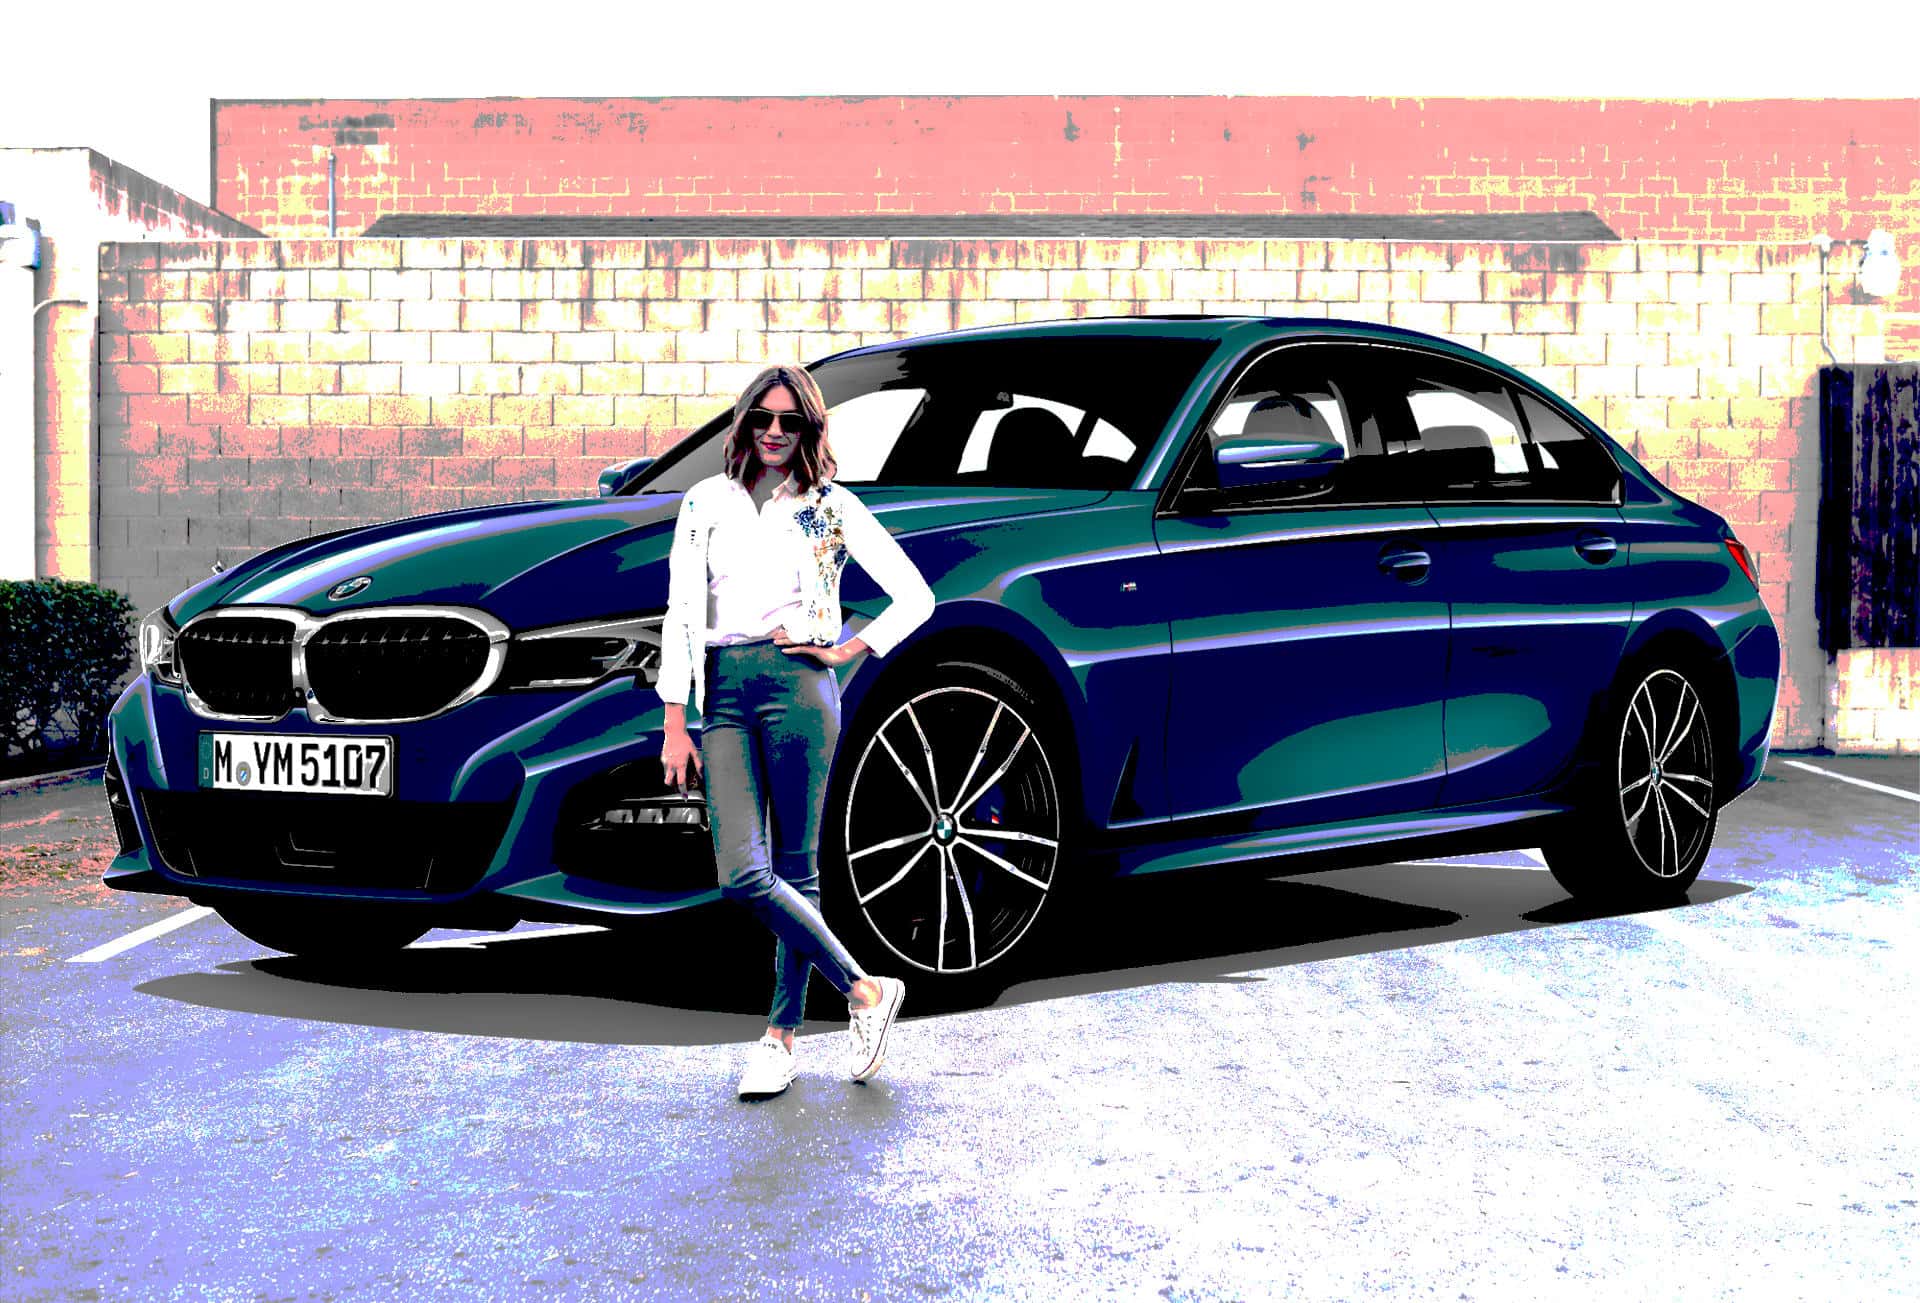 The New 3 Series Is Huge And I'm Not Down With That